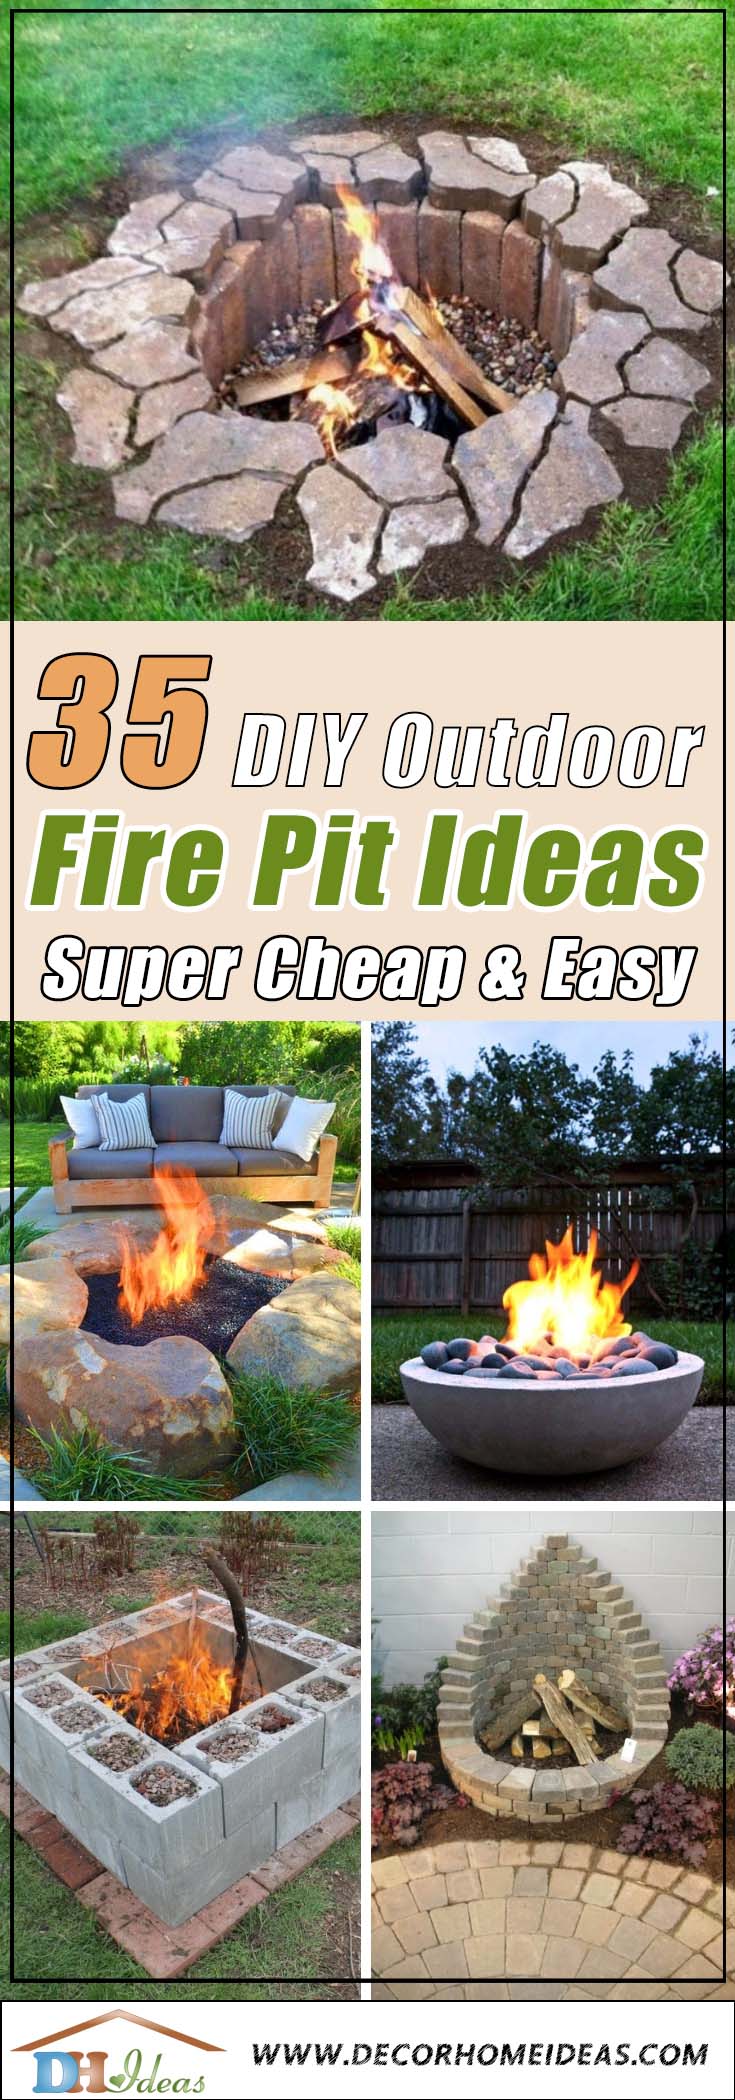 35 Easy To Do Fire Pit Ideas And, Build An Inexpensive Fire Pit